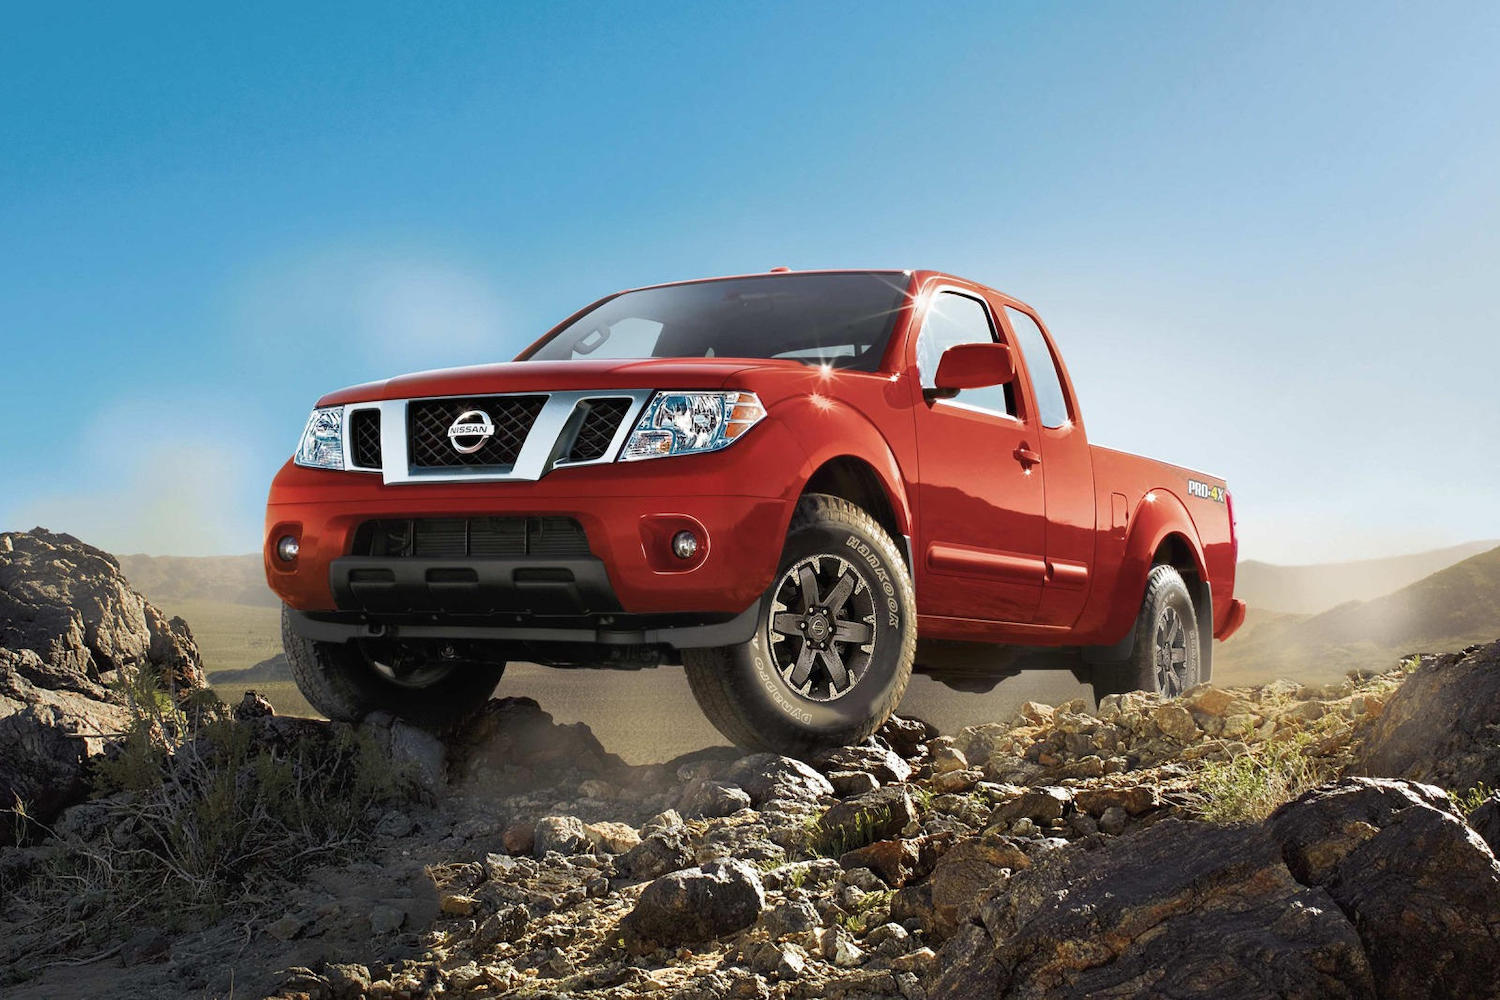 Promo photo of a red Nissan Frontier 4x4 reliable midsize pickup truck parked atop a rock pile, a cloudless blue sky visible in the background.